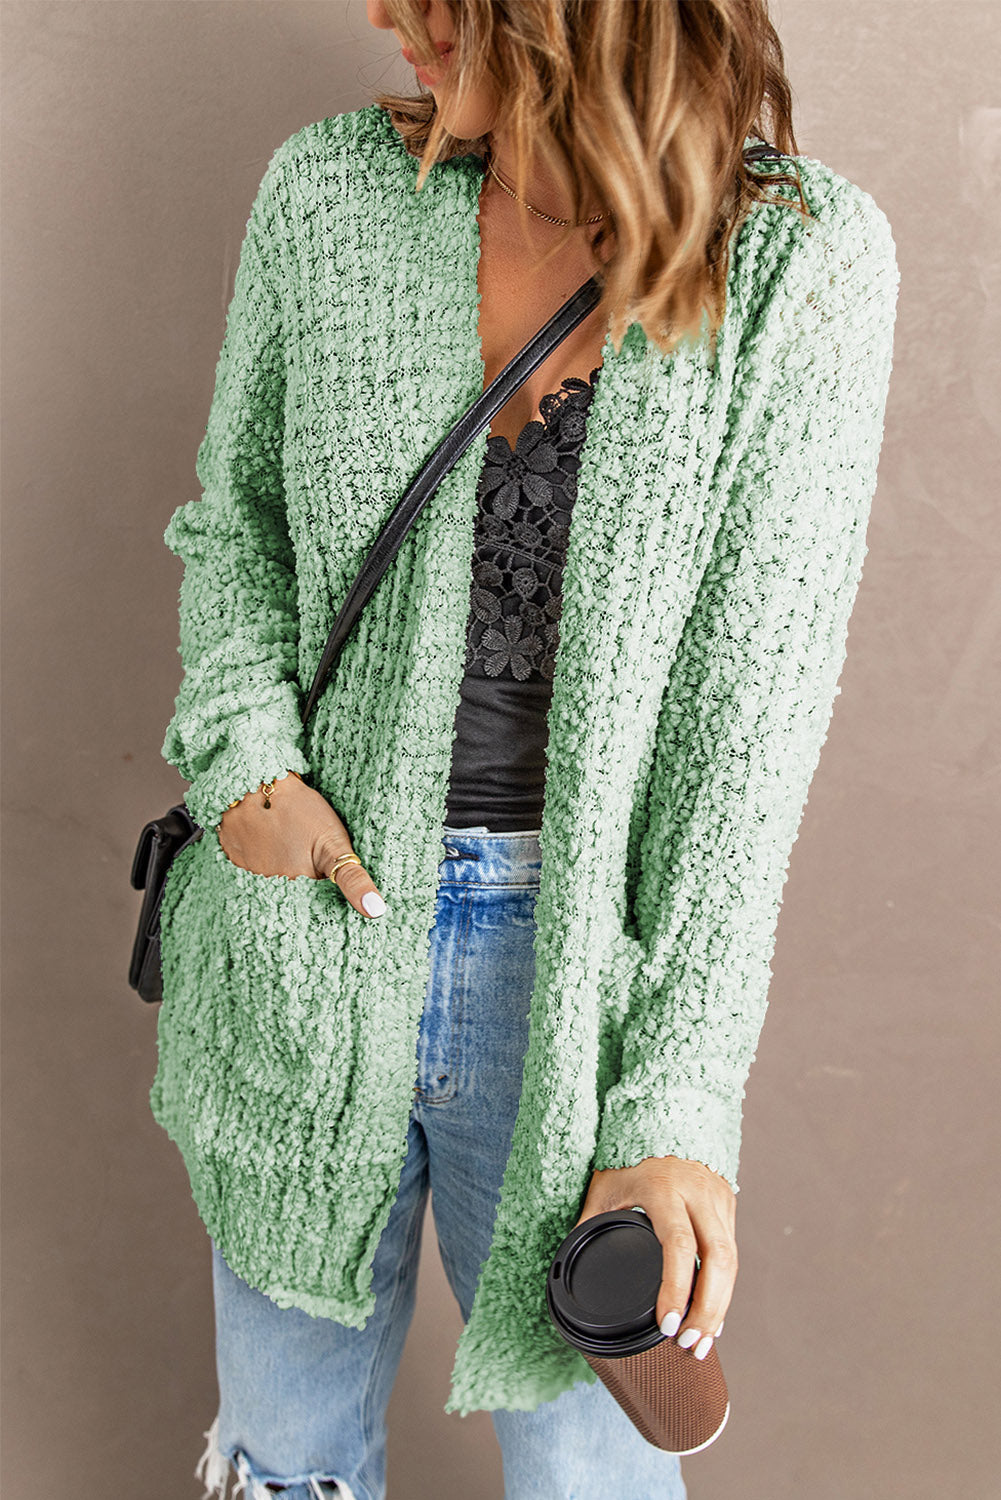 Cardigan Vert Chic Femme Caillou Plage Texturee